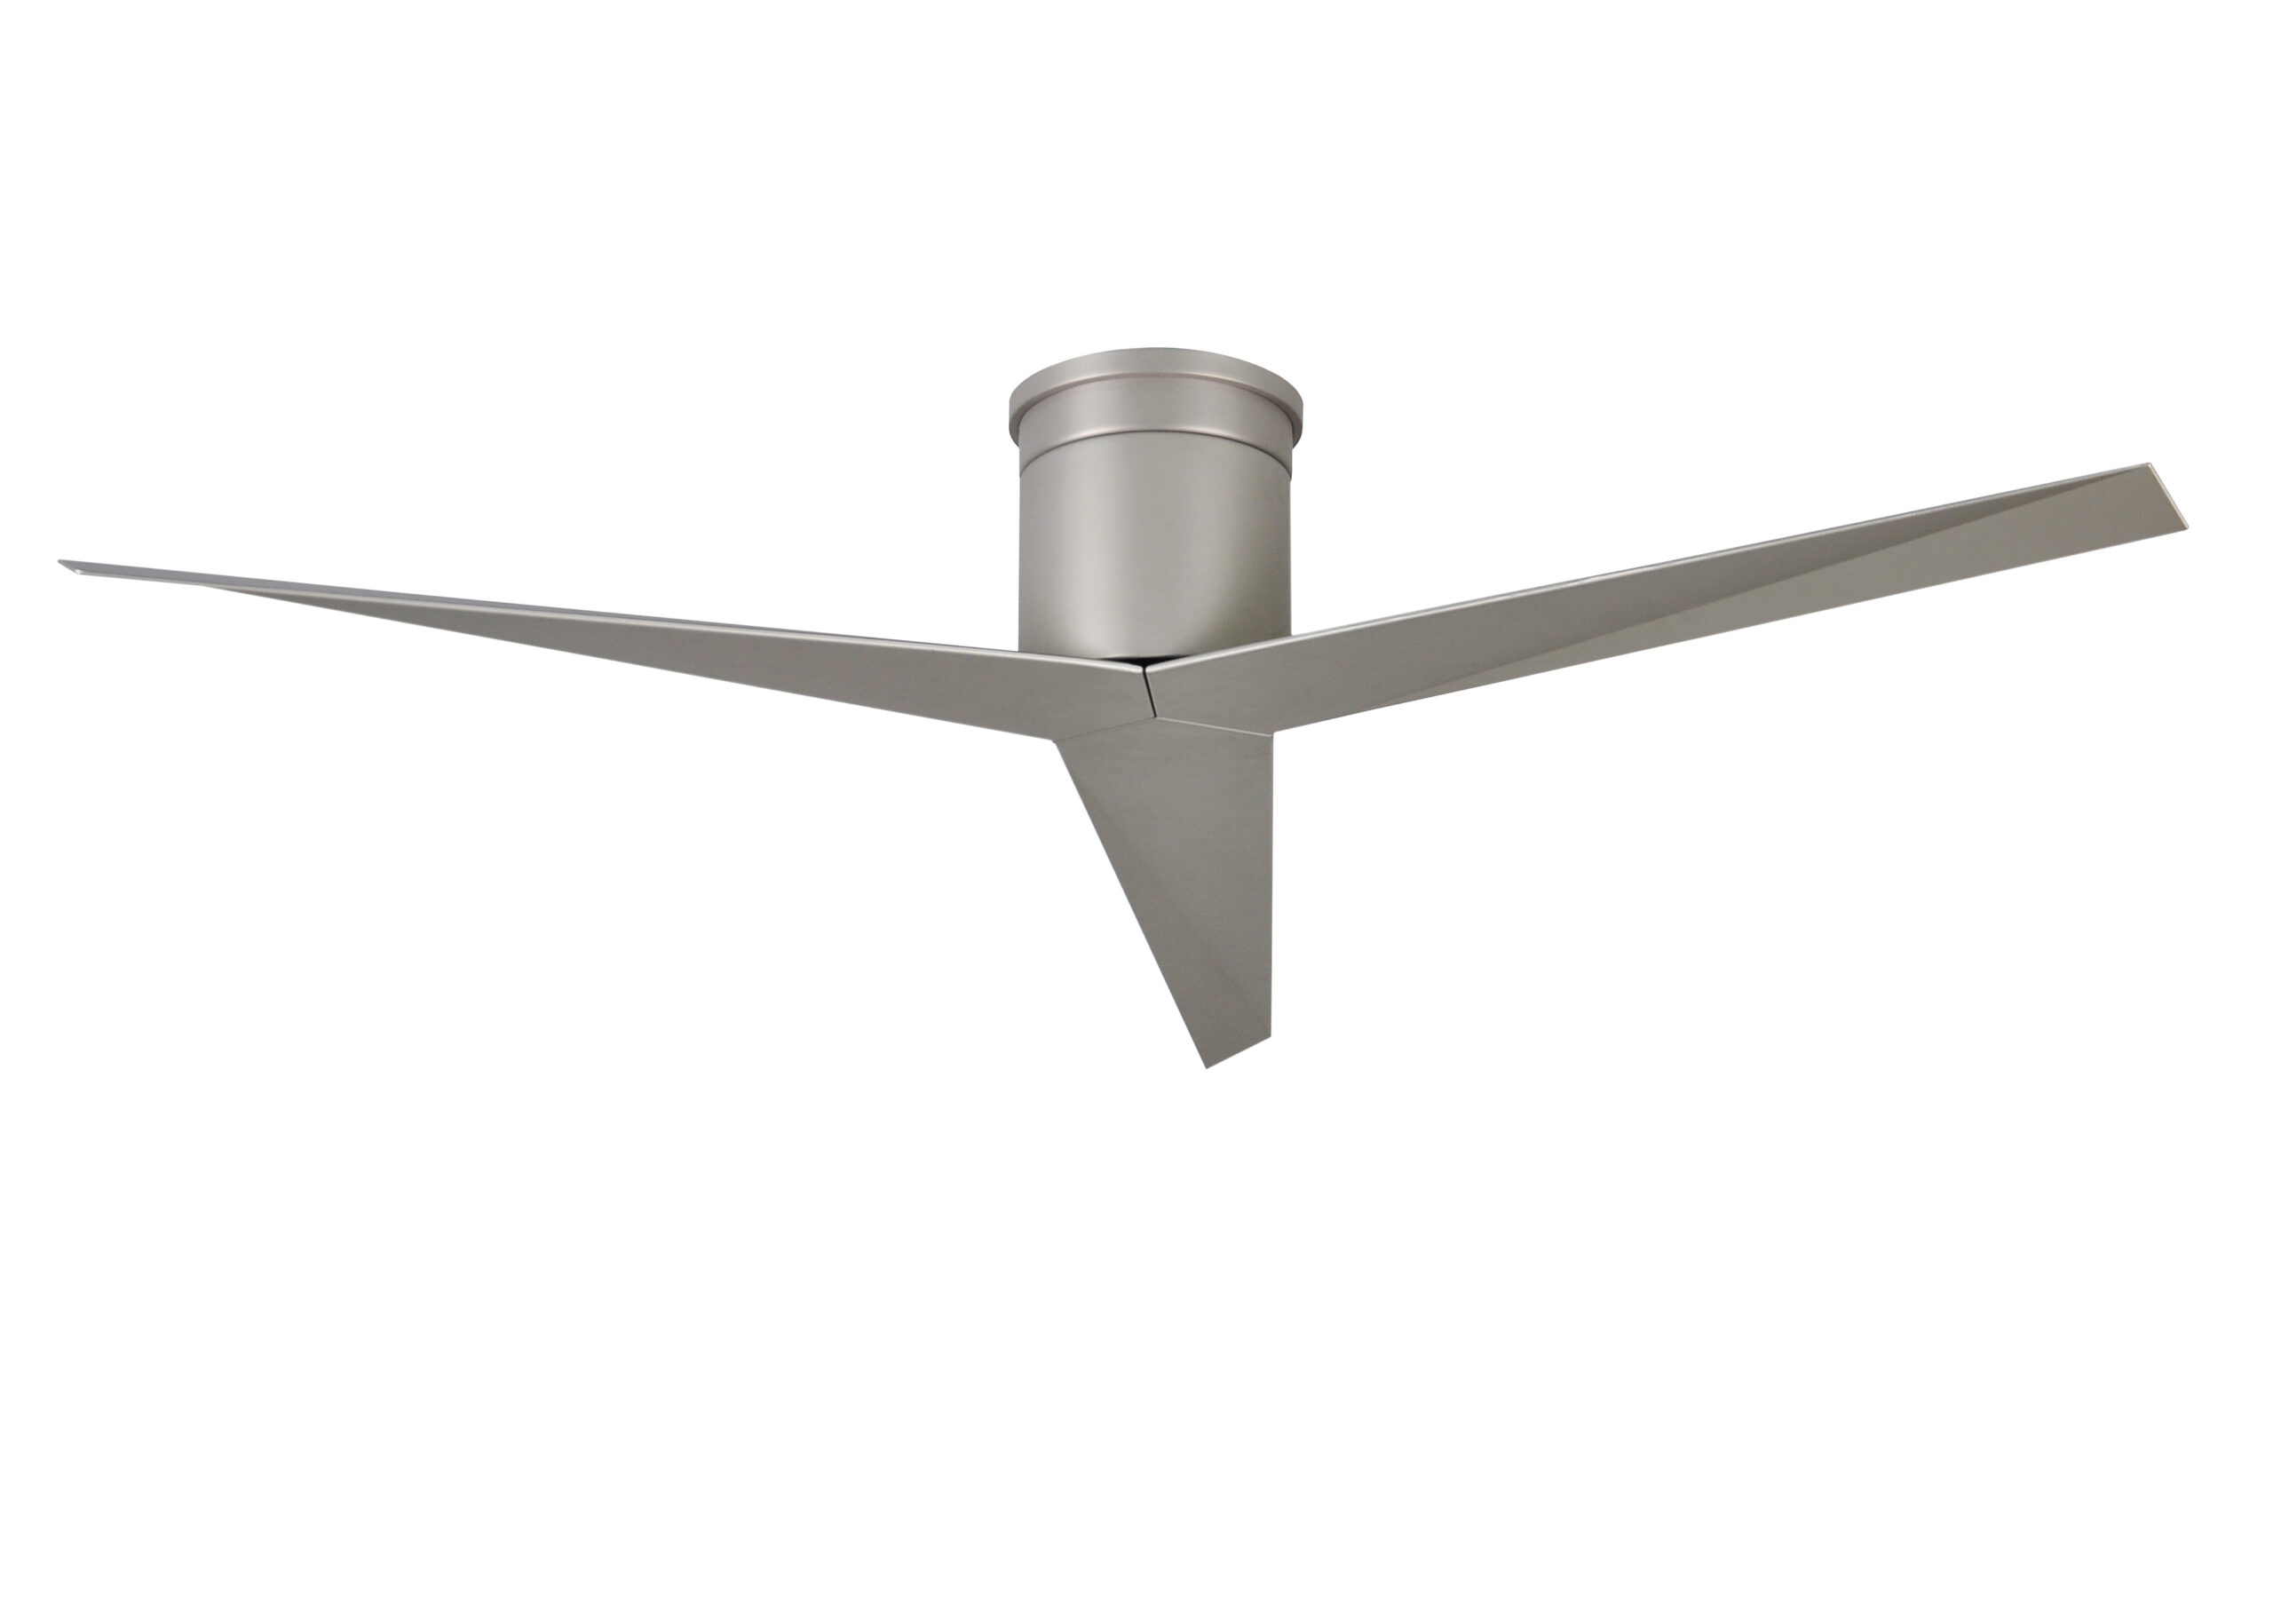 Eliza-H Ceiling Fan in Brushed Nickel with Brushed Nickel Blades